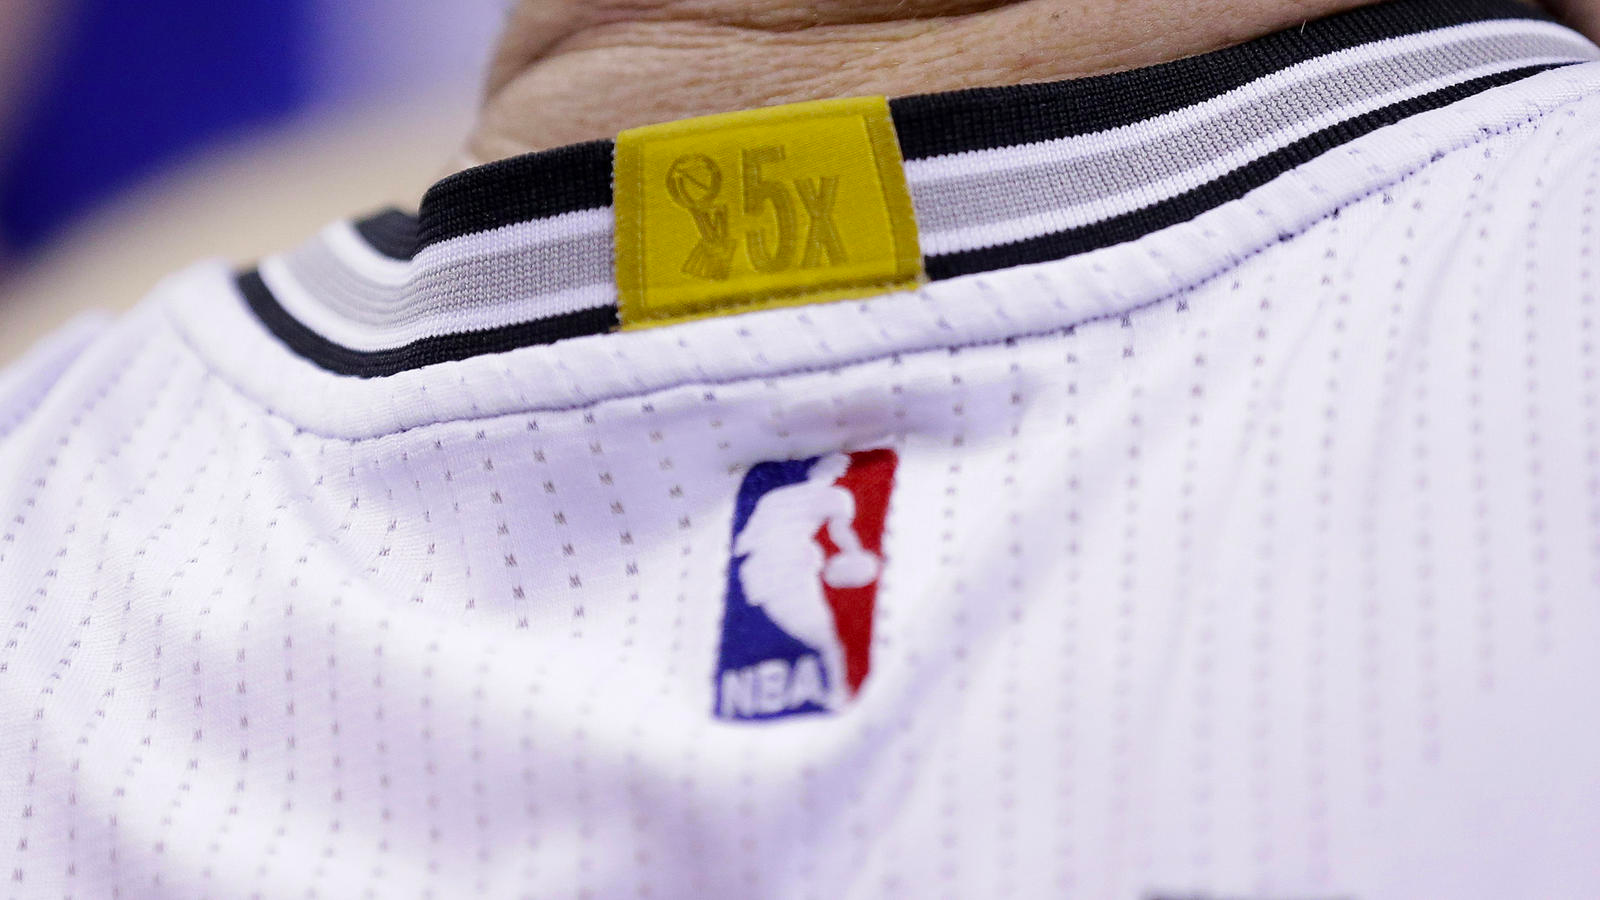 nba jersey patches